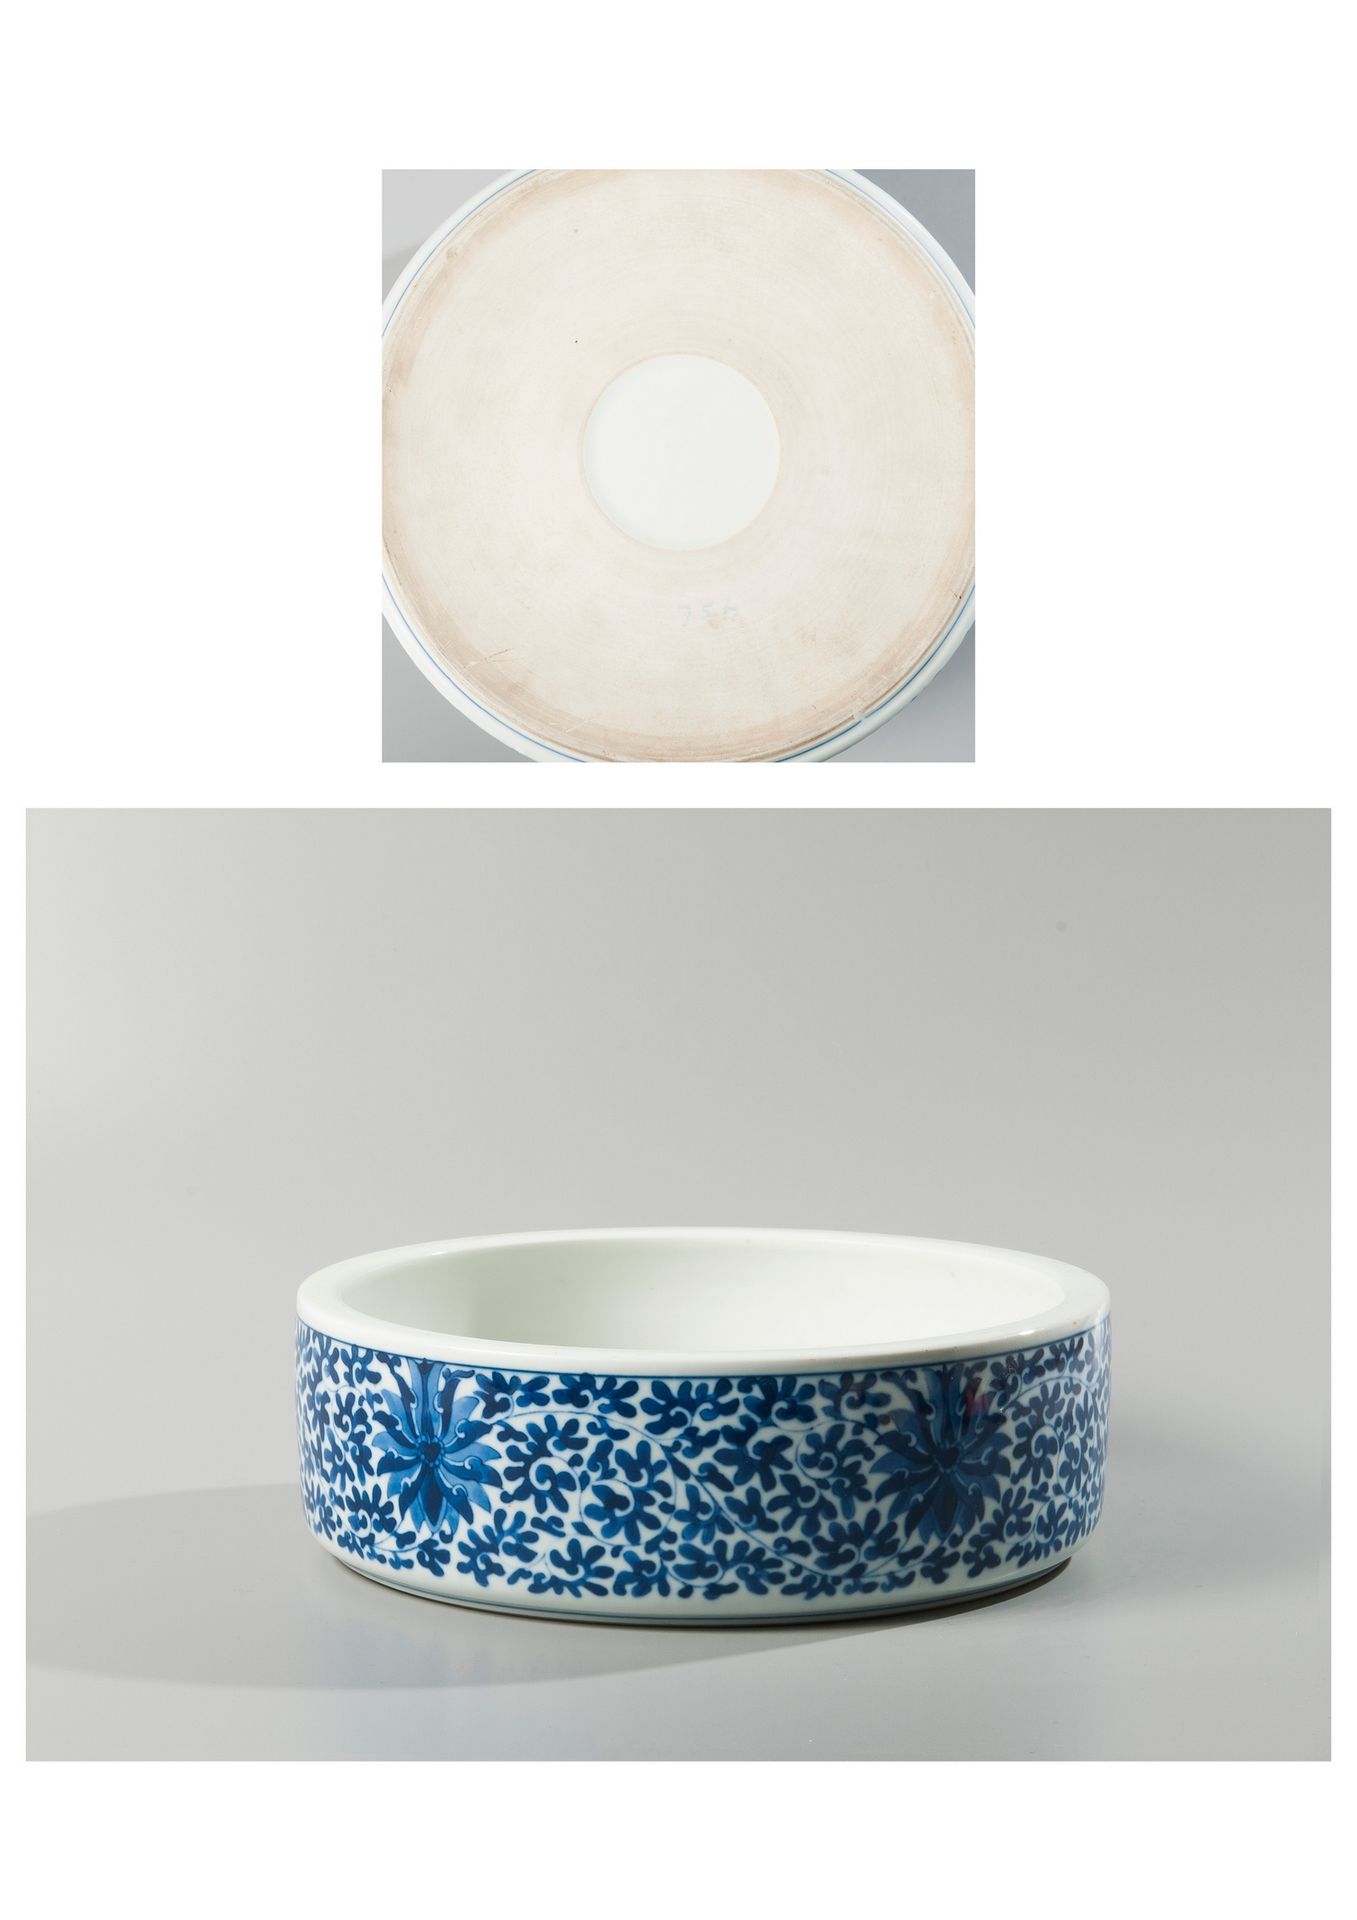 Null CHINA, 20th century.

Circular basin in white-blue enamelled porcelain. Flo&hellip;